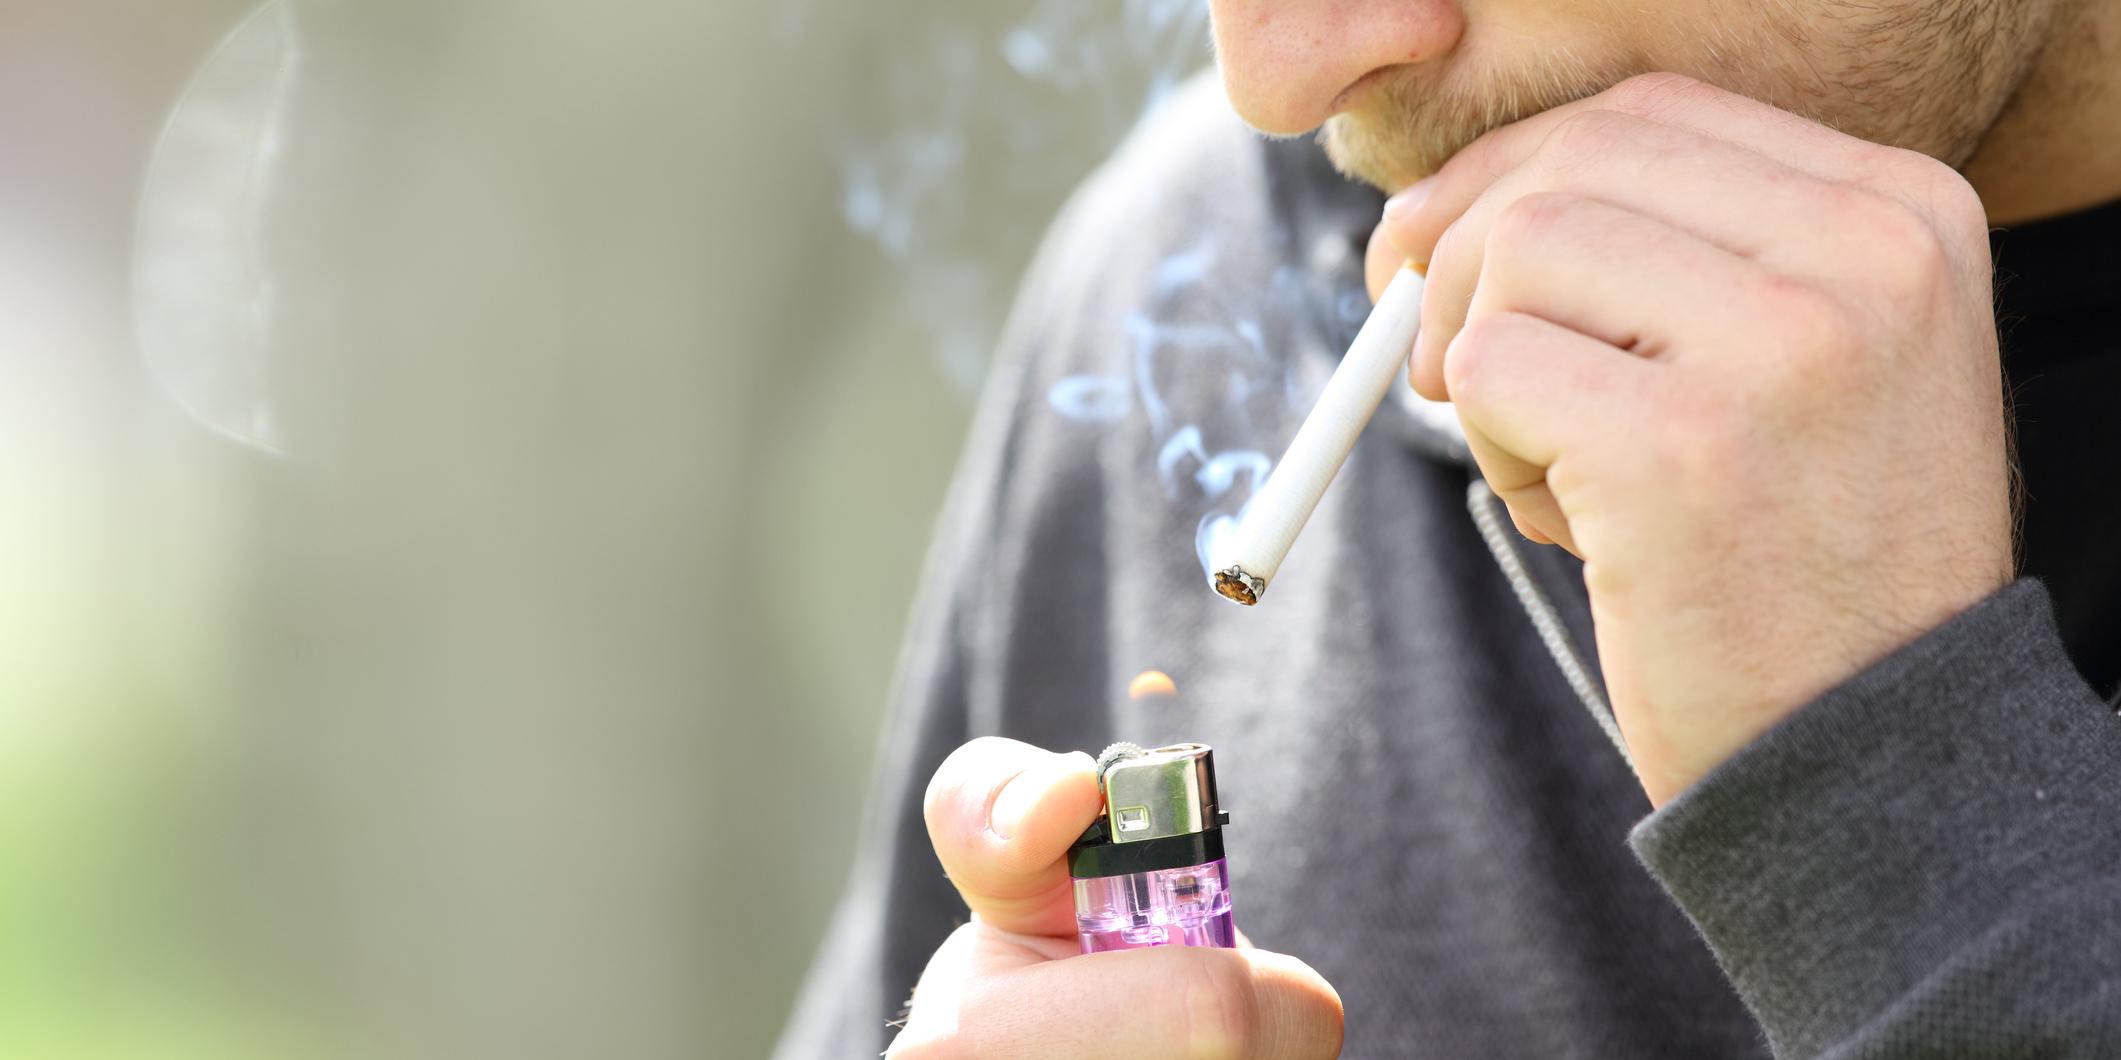 Smoking accounts for 35 per cent of all respiratory deaths in England